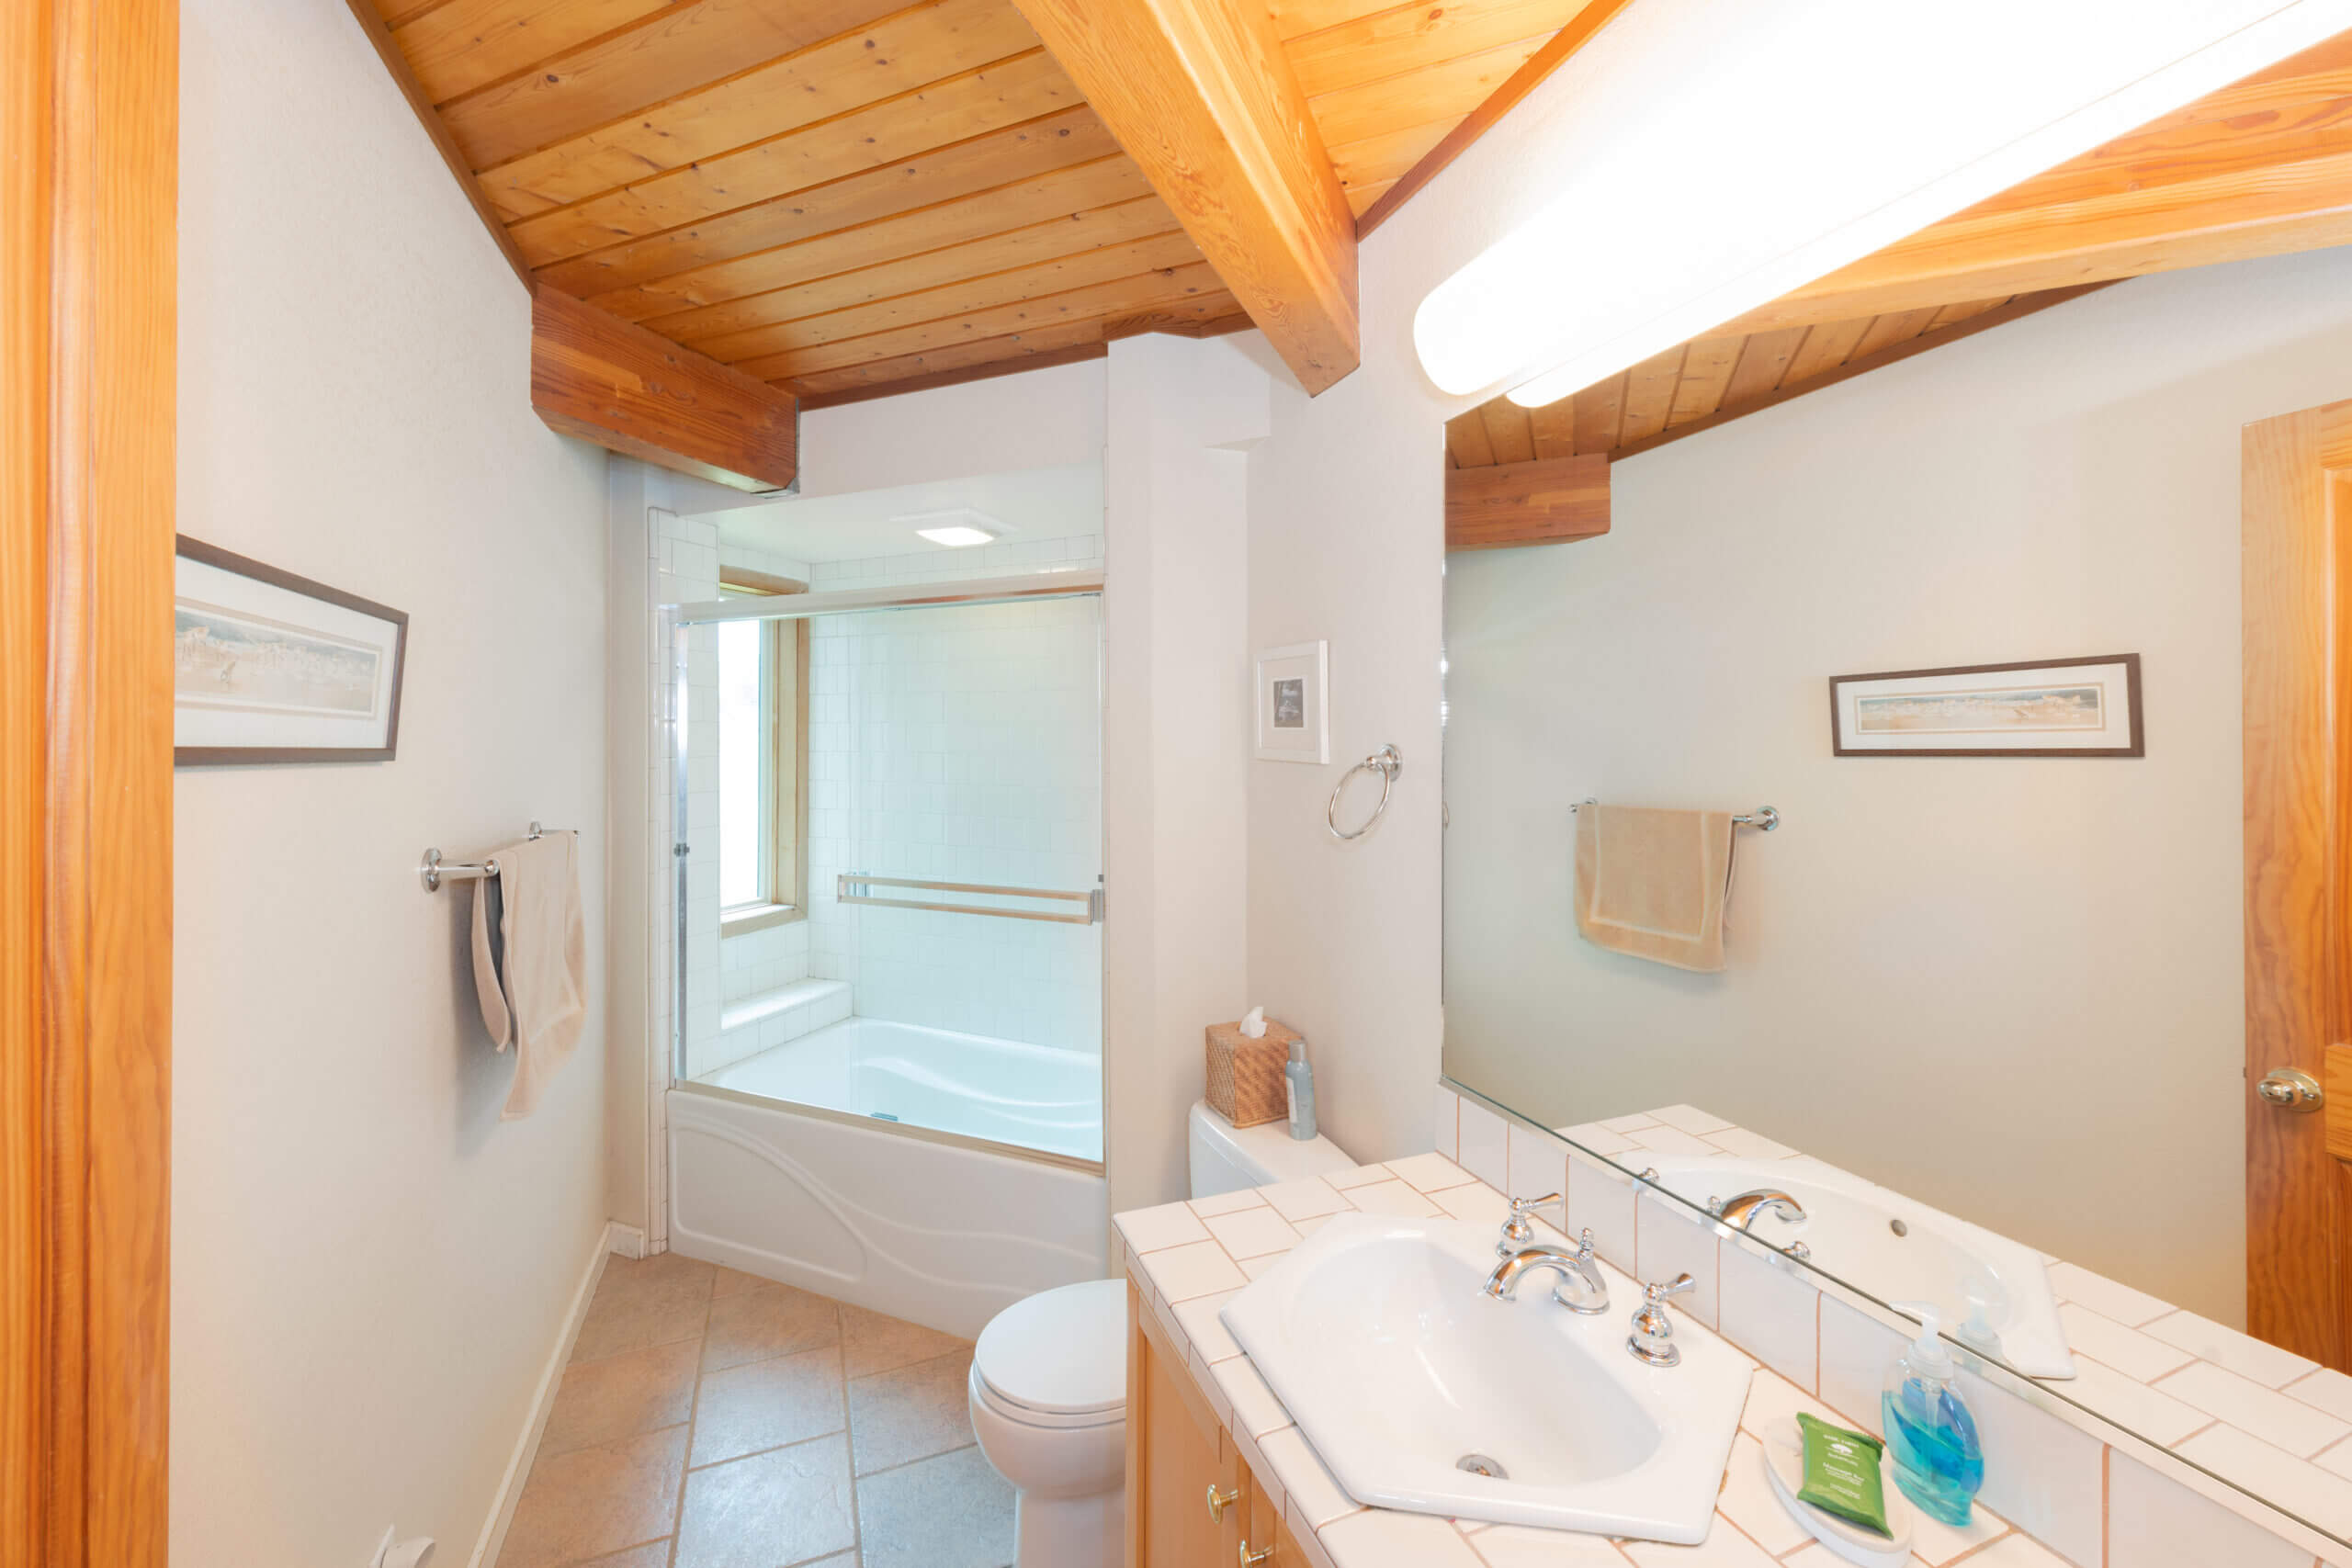 Pelicans Rest downstairs bath with bath shower combo, sink and wood beam ceiling